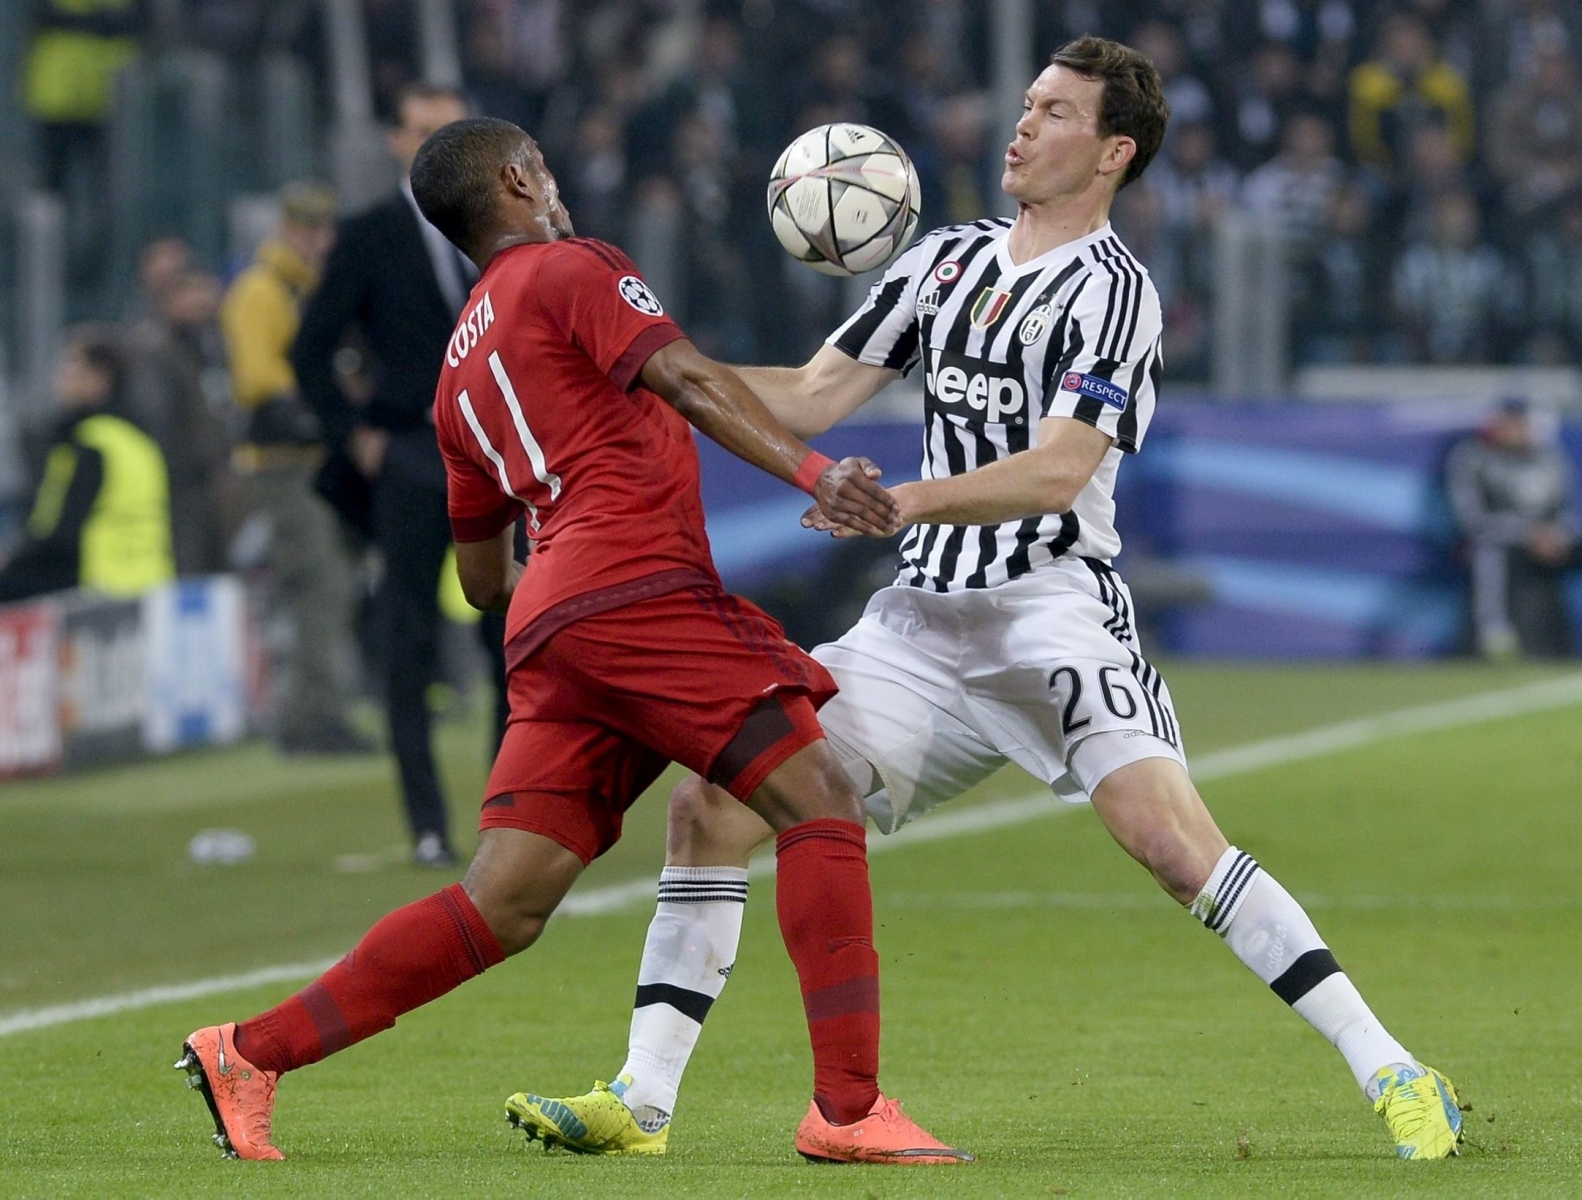 Bayern's Douglas Costa, left, faces Juventus' Stephan Lichtsteiner during the Champions League, round of 16, first-leg soccer match between Juventus and Bayern Munich at the Juventus stadium in Turin, Italy, Tuesday, Feb. 23, 2016. (AP Photo/Massimo Pinca) FUSSBALL CL JUVENTUS BAYERN